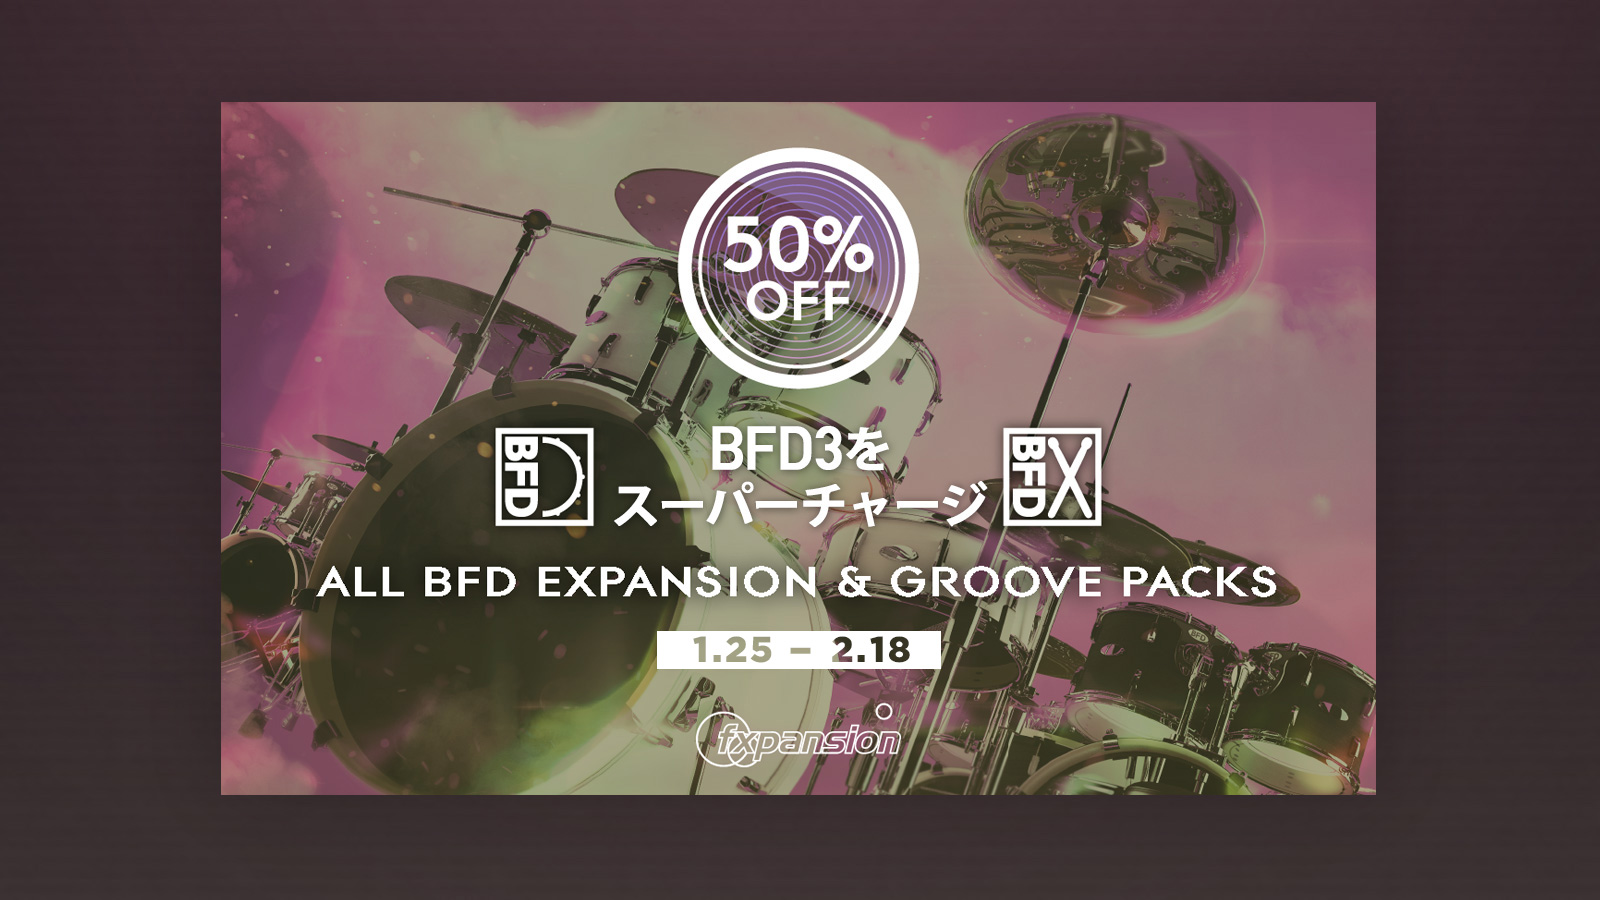 BFD Expansions&Grooves全製品が50% OFF！！